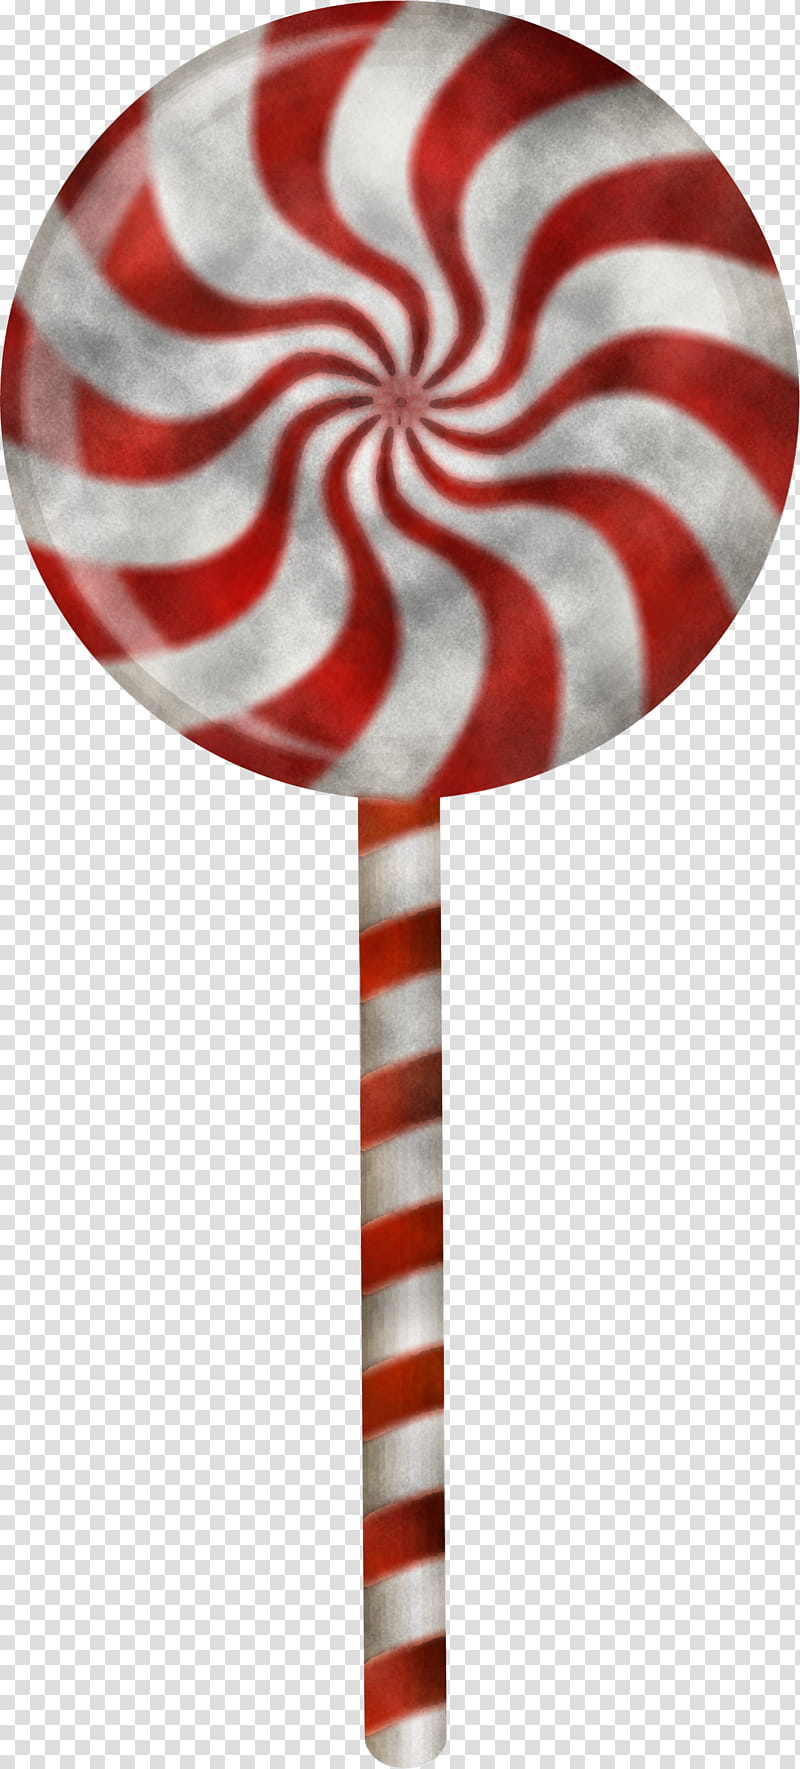 Candy cane, Stick Candy, White, Red, Flag, Confectionery, Christmas , Polkagris transparent background PNG clipart